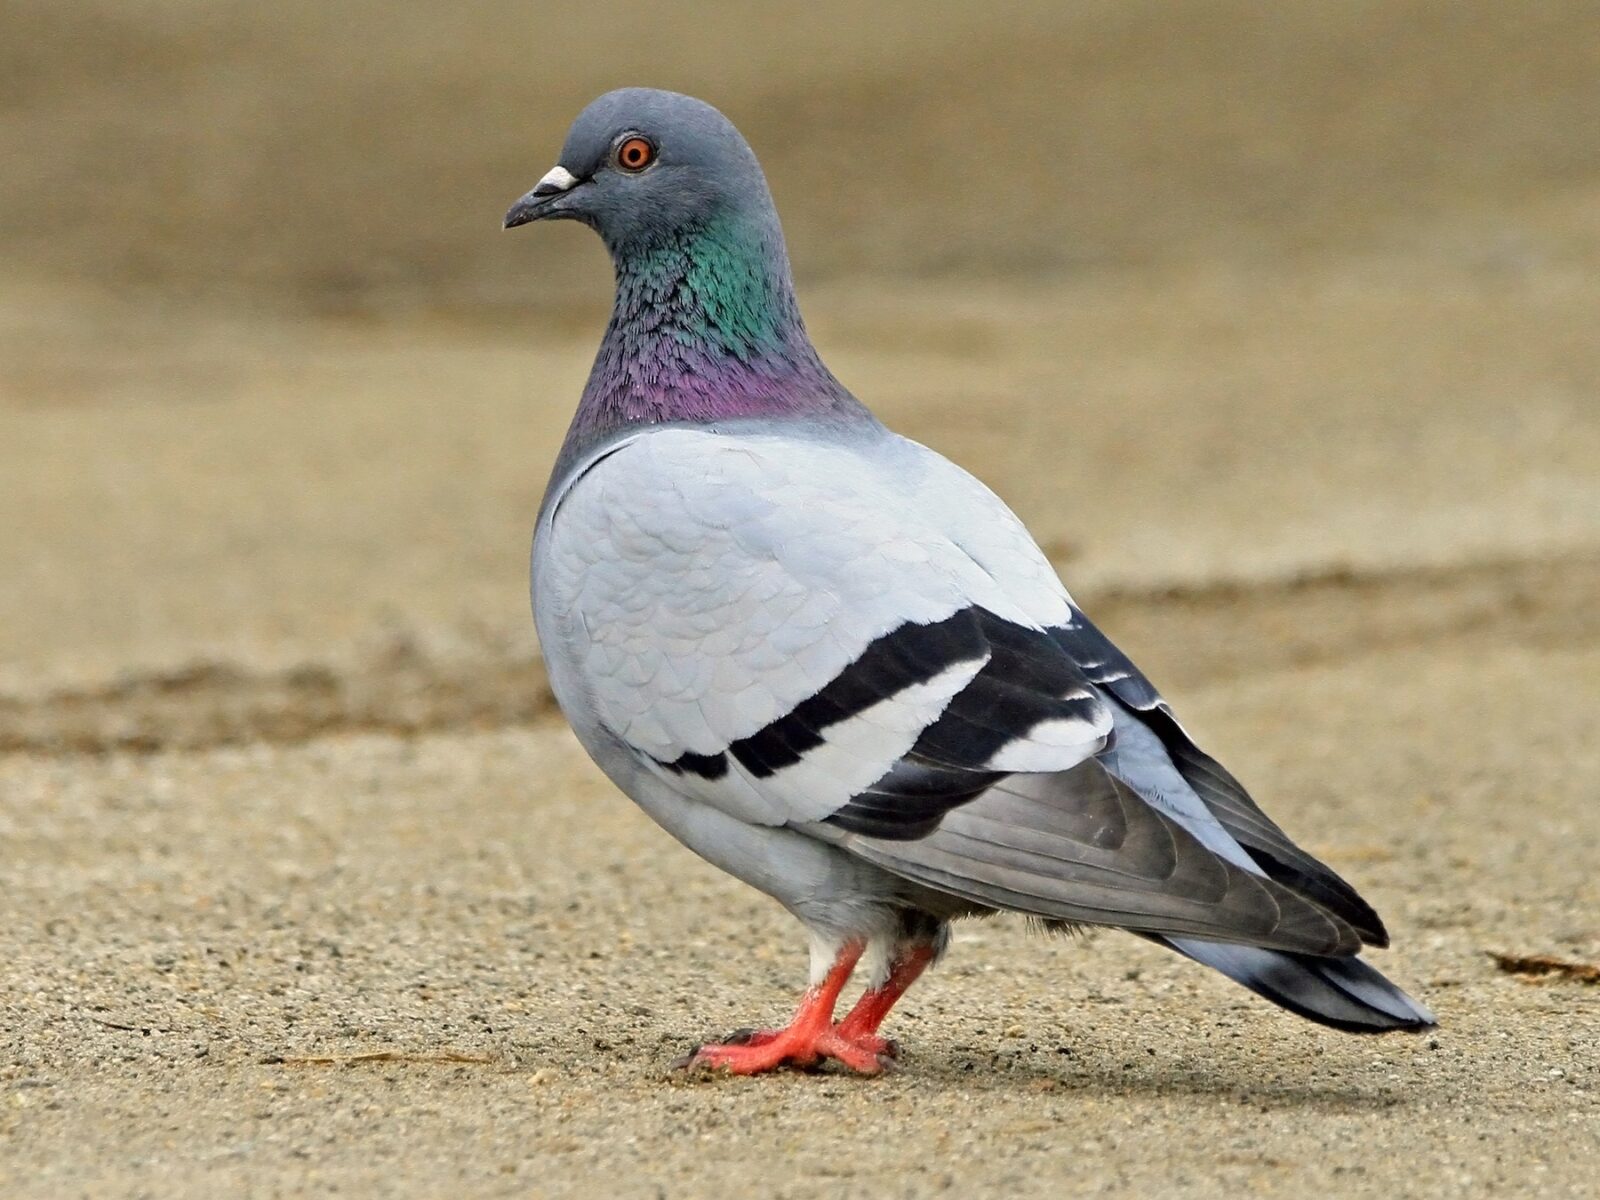 Which Of The Following Statements Is True? pigeon